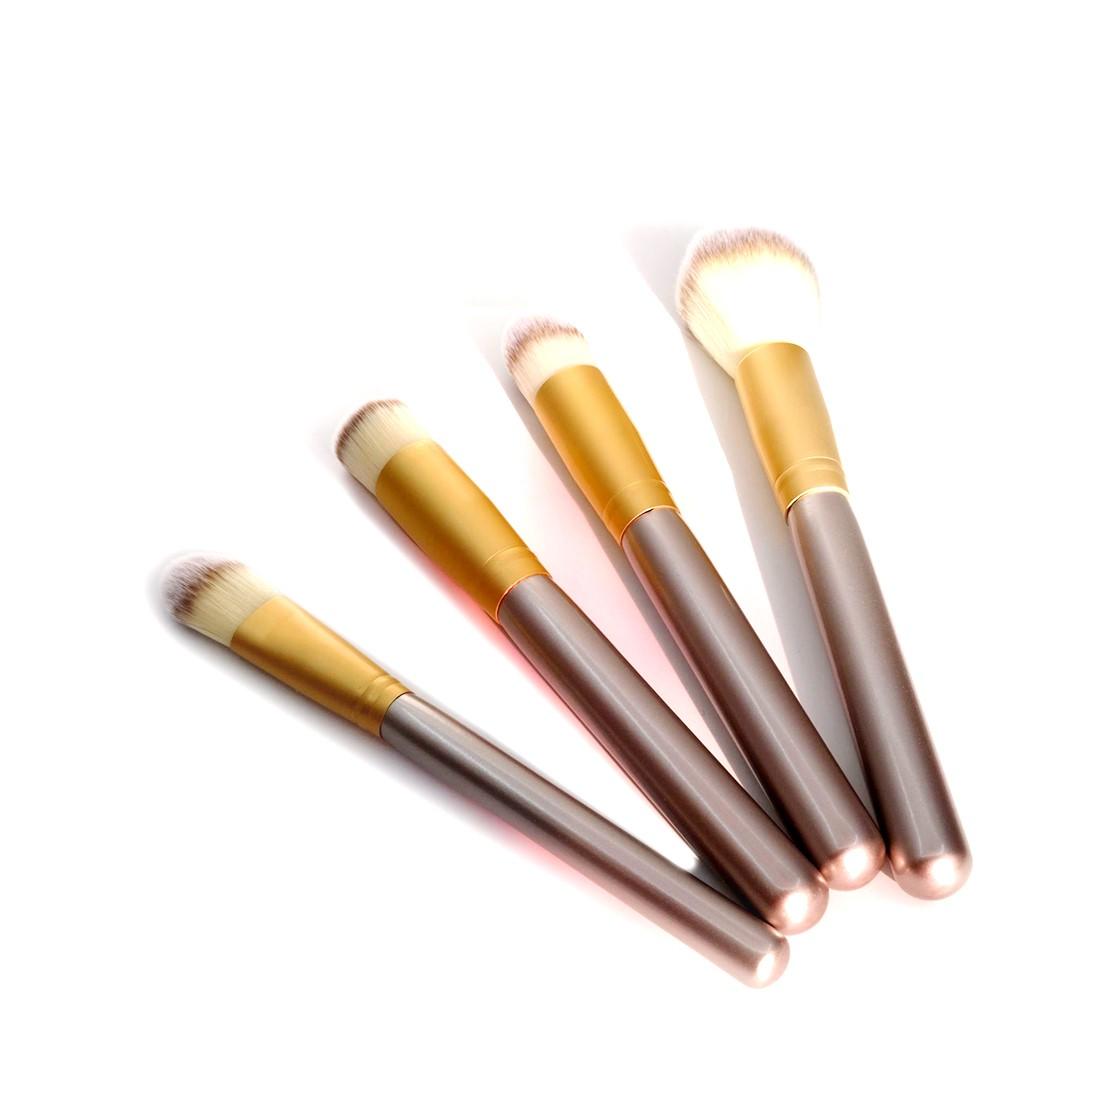 Suprabeauty low-cost eye brushes best supplier for sale-1